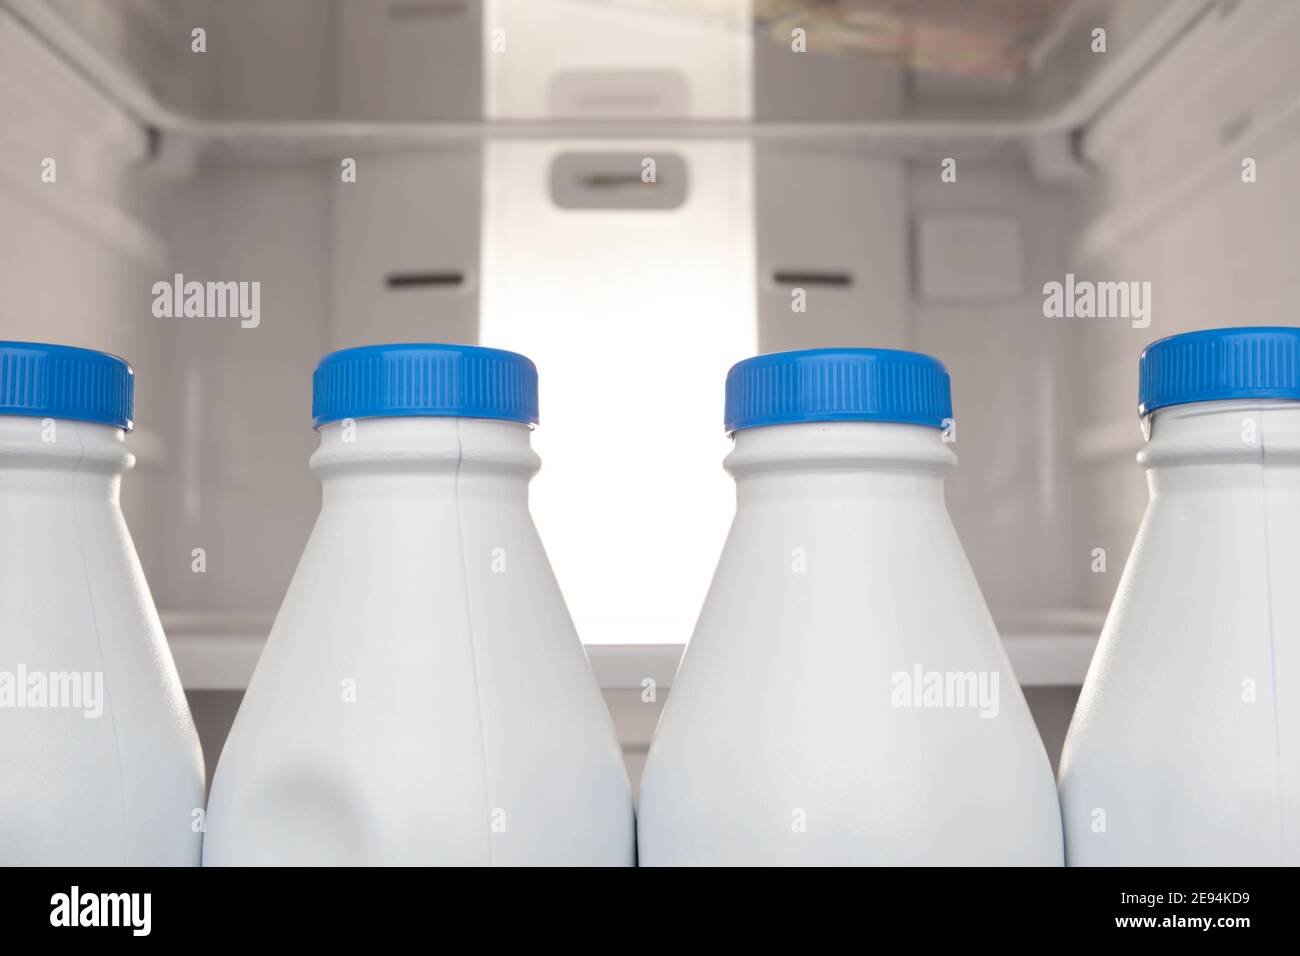 Group of plastic milk bottle stored and lined up in refrigerator door Stock Photo